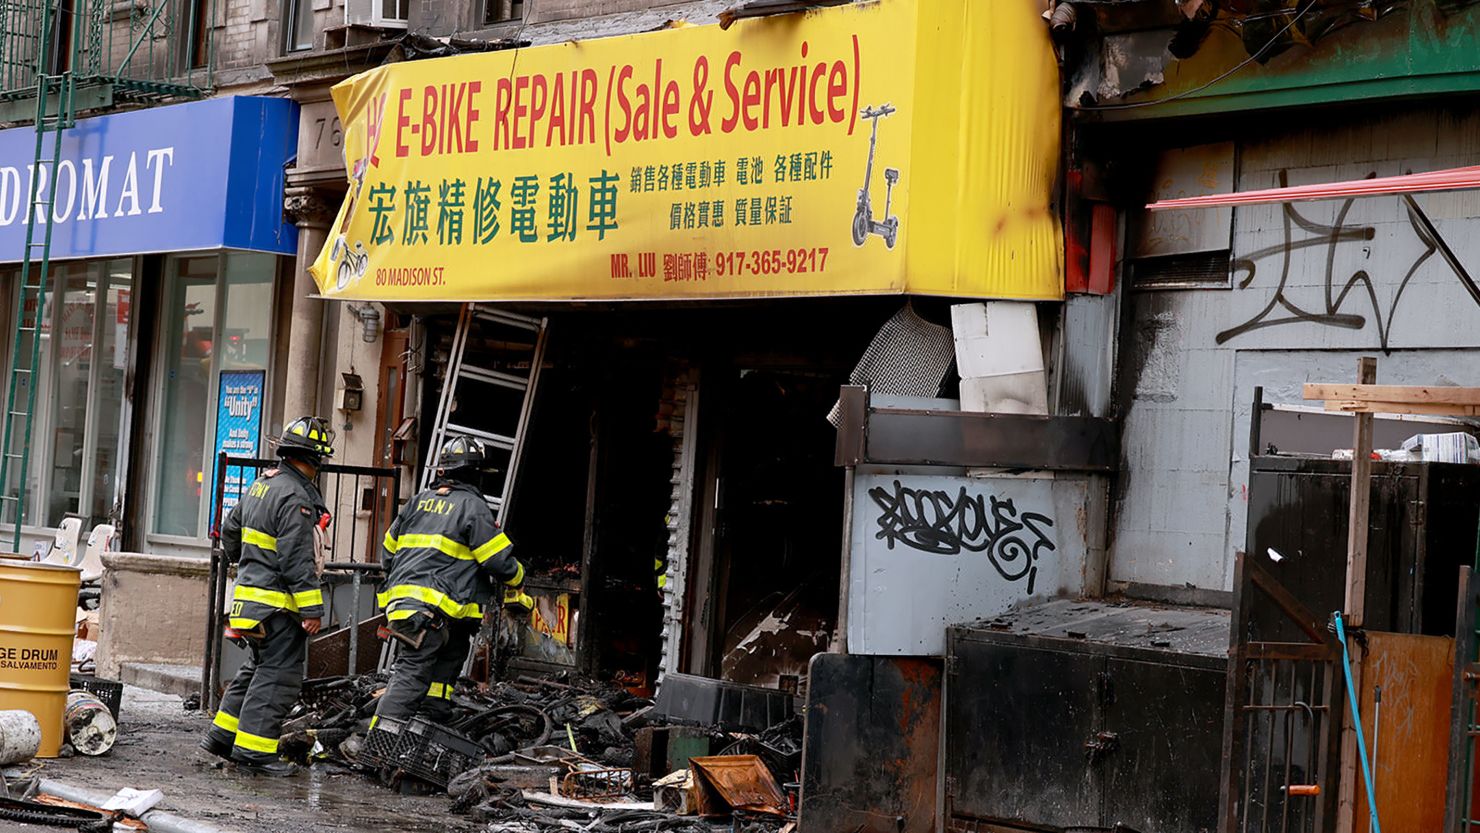 The charred remains of the e-bike repair and sales store on Madison St. in the Chinatown area of Manhattan early Tuesday.